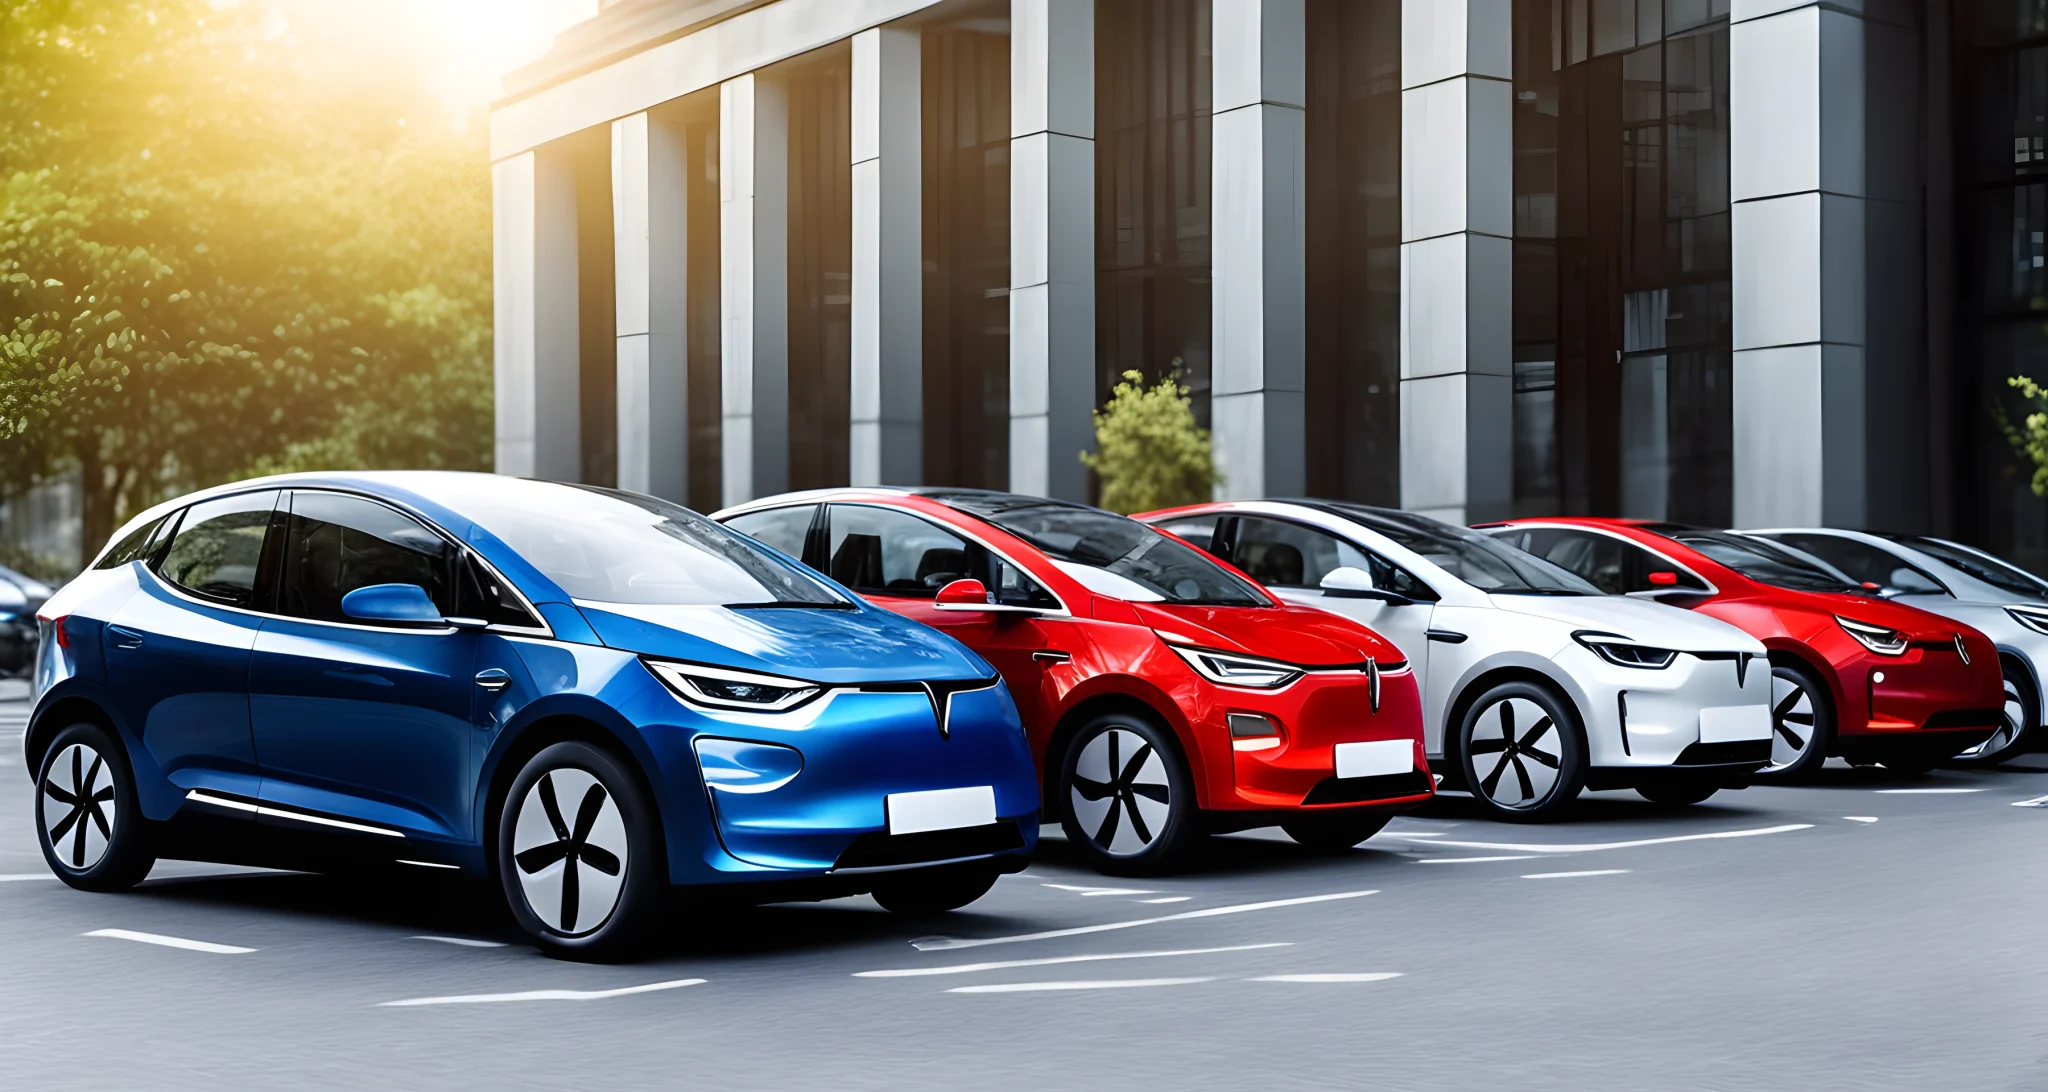 The image shows a lineup of various electric car models from different manufacturers.